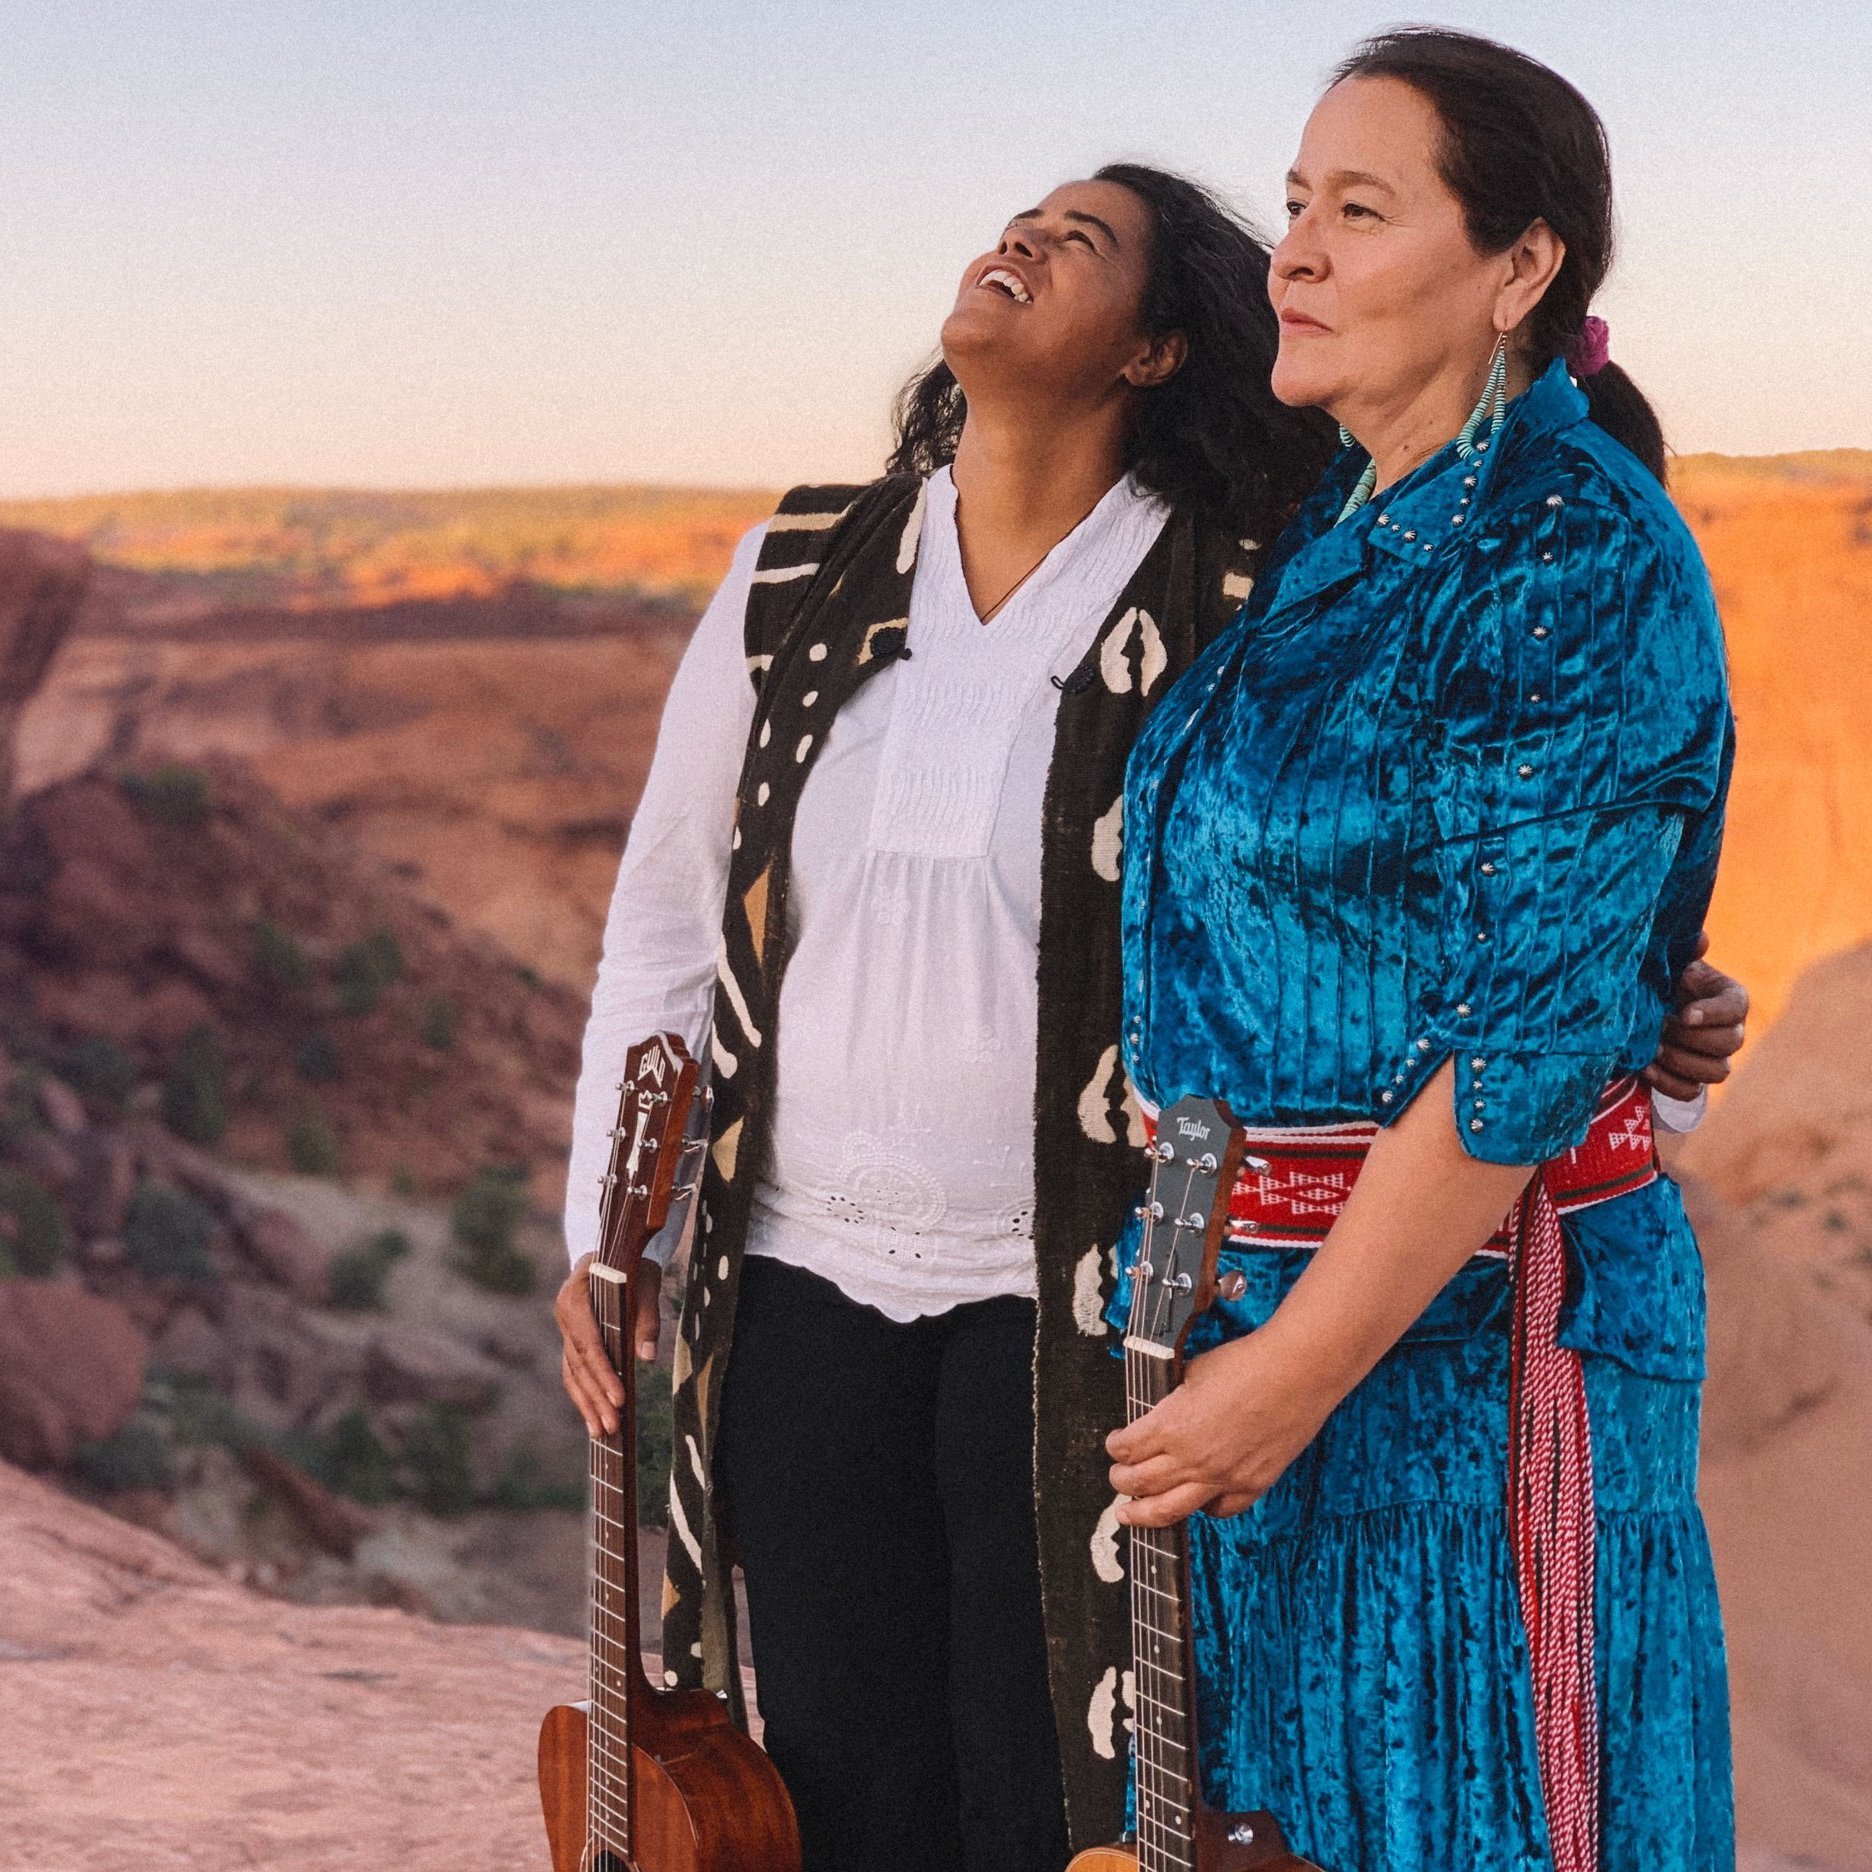 👋🏾 Have you met our #IndigenousWays founders, Elena Higgins and Tash Terry??

Elena, of #Maori/Samoan descent from #NewZealand, and Tash, a #Din&eacute; from the #NavajoNation, founded IndigenousWays in 2007!

First joining forces as musical group 